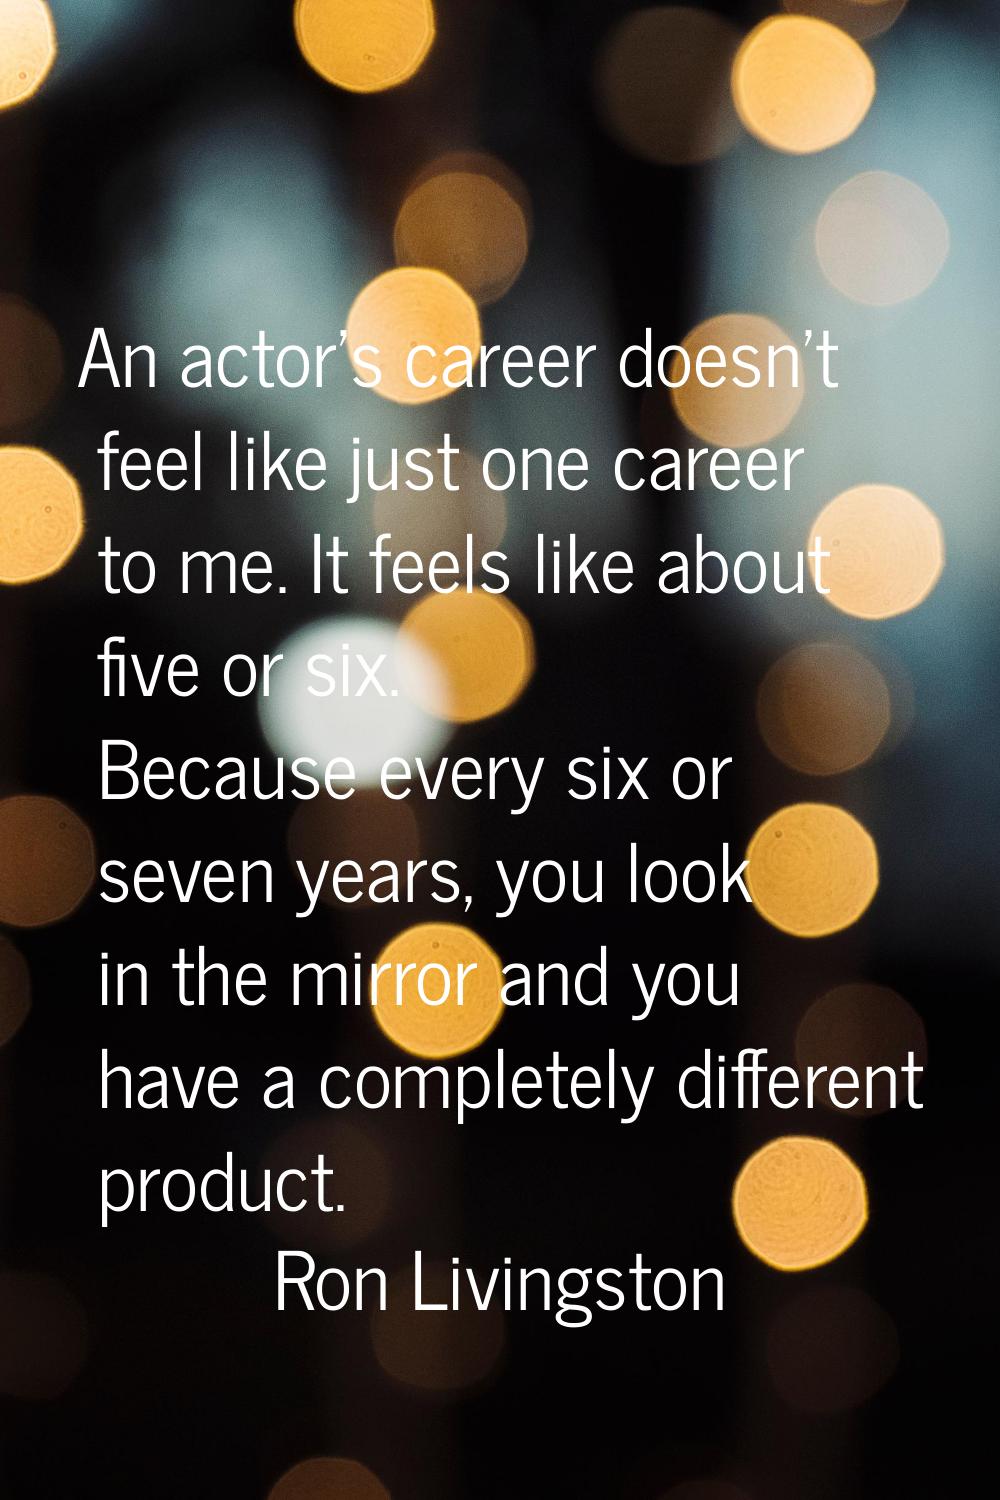 An actor's career doesn't feel like just one career to me. It feels like about five or six. Because